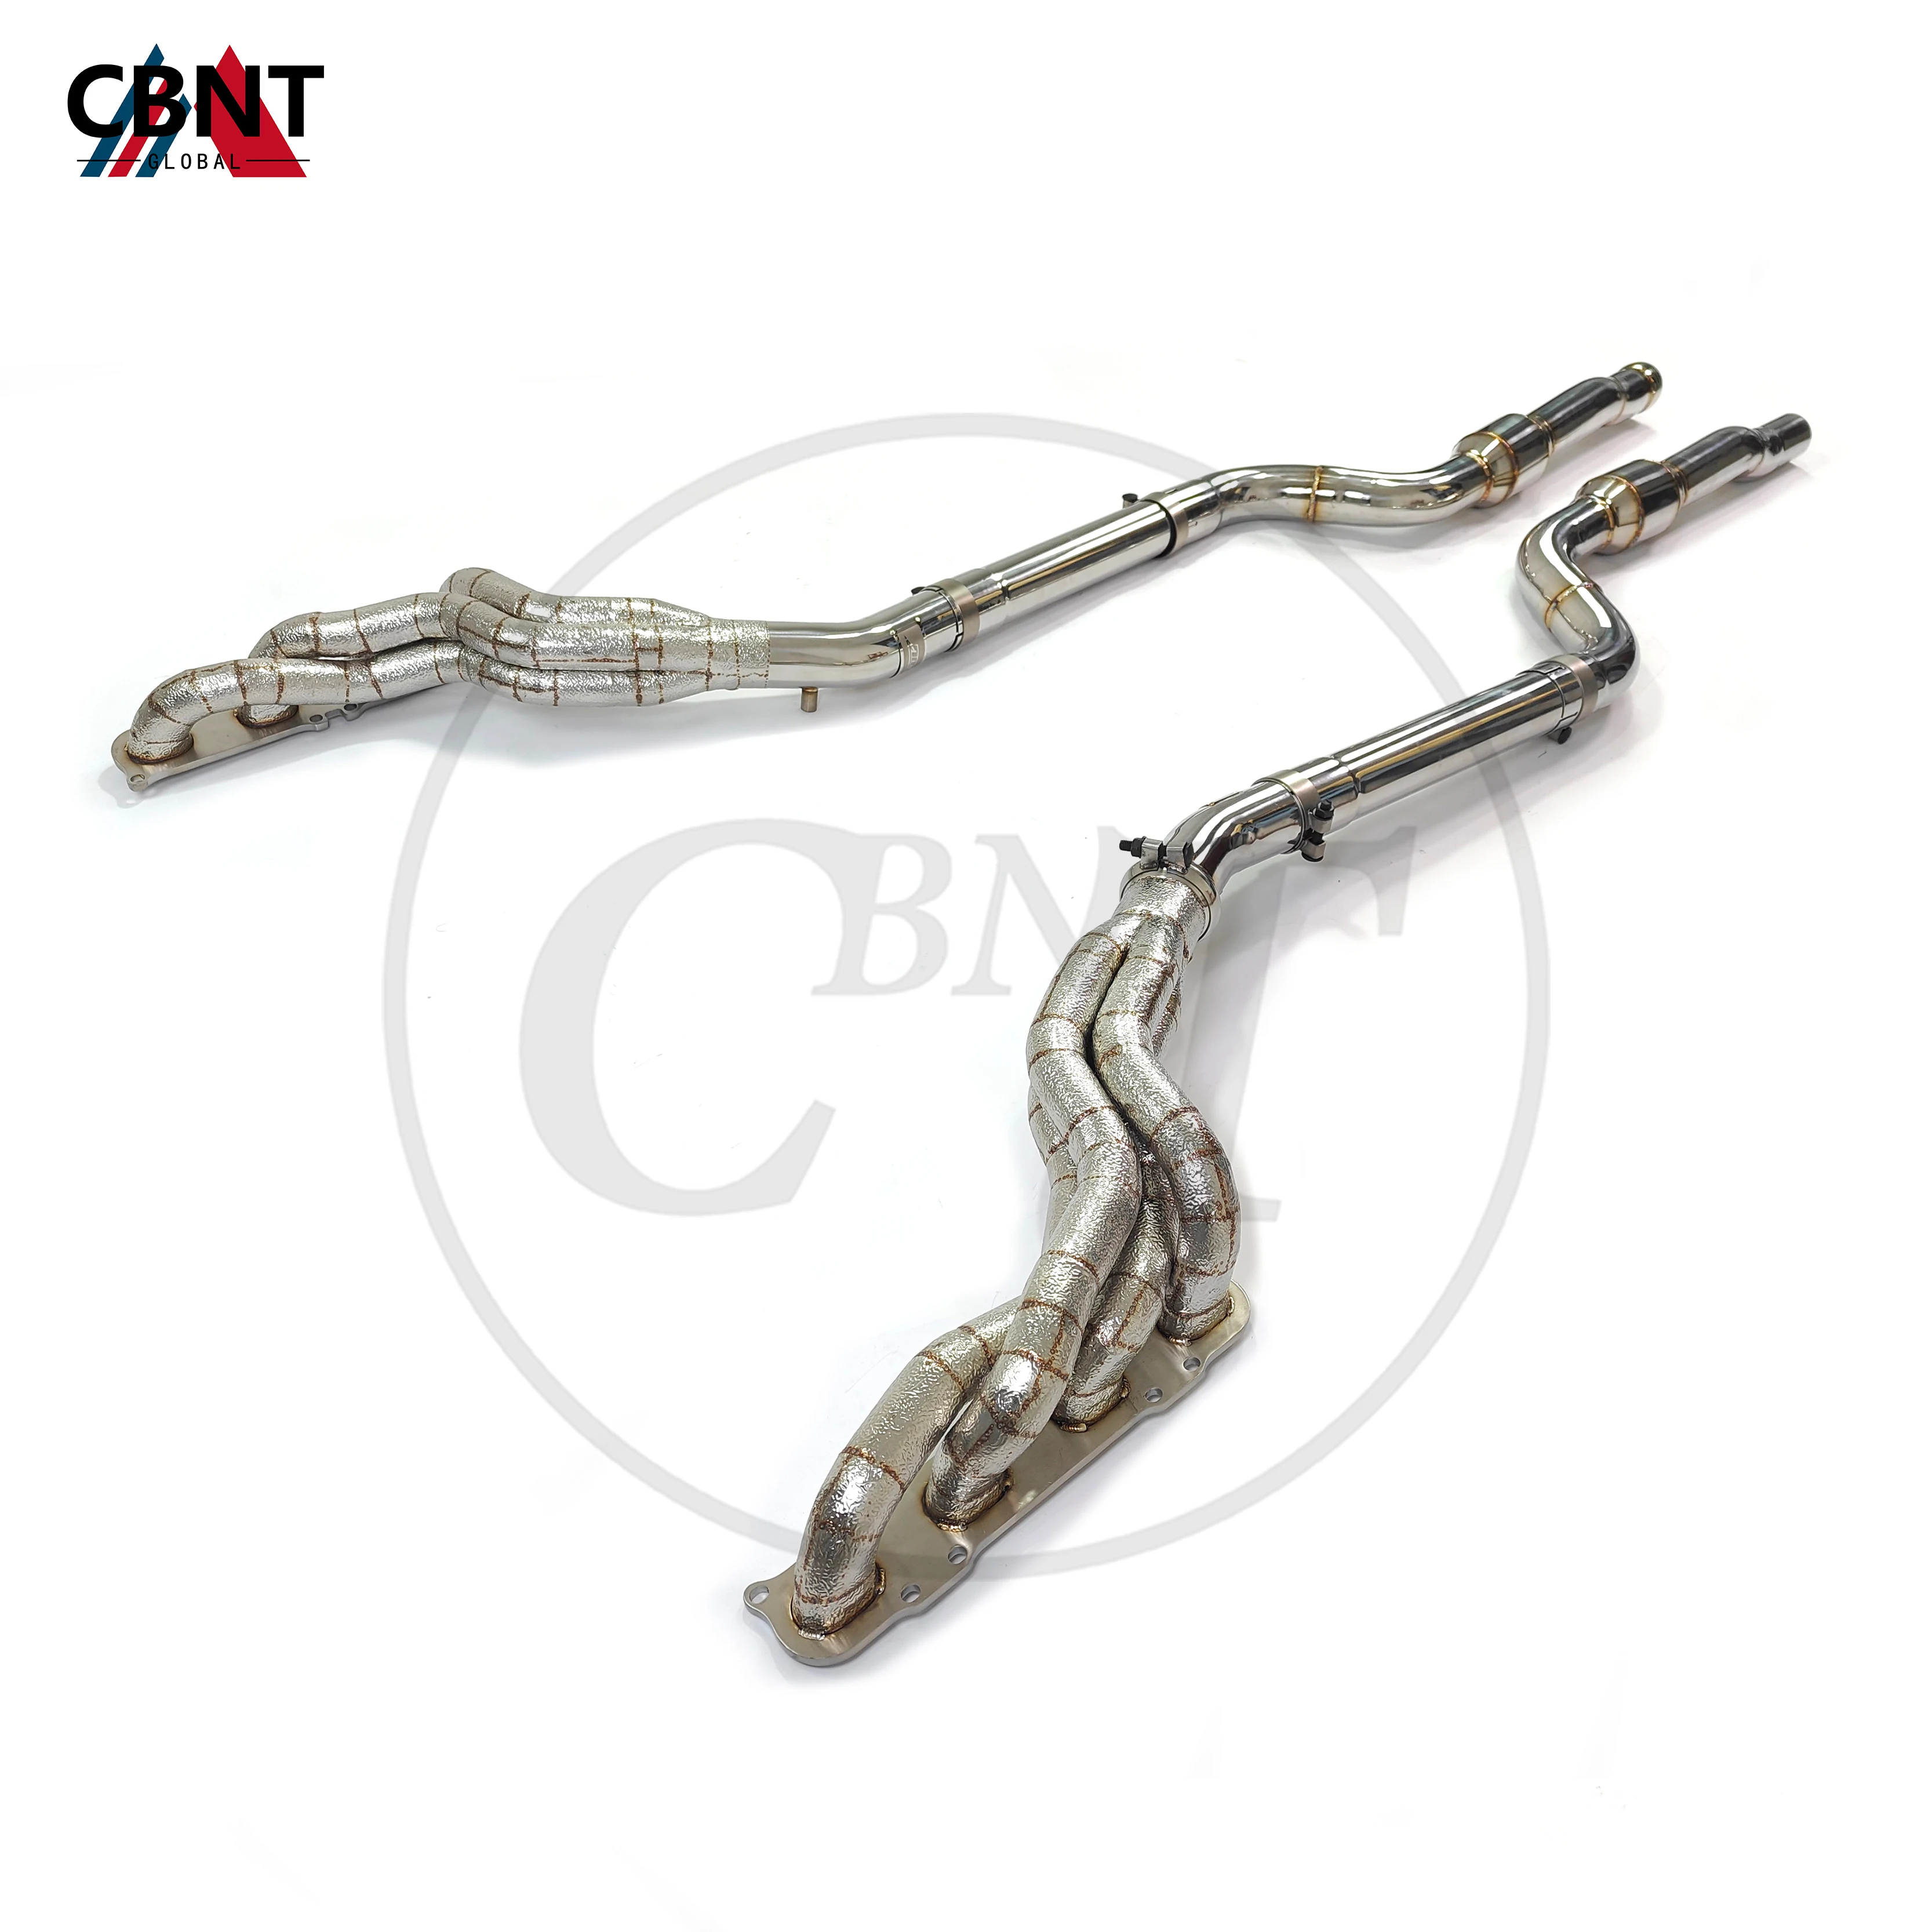 

CBNT Catted/Catless Downpipe SS304 High Quality Exhaust-pipe Exhaust Manifold for Mercedes Benz C63 AMG W204 6.2L V8